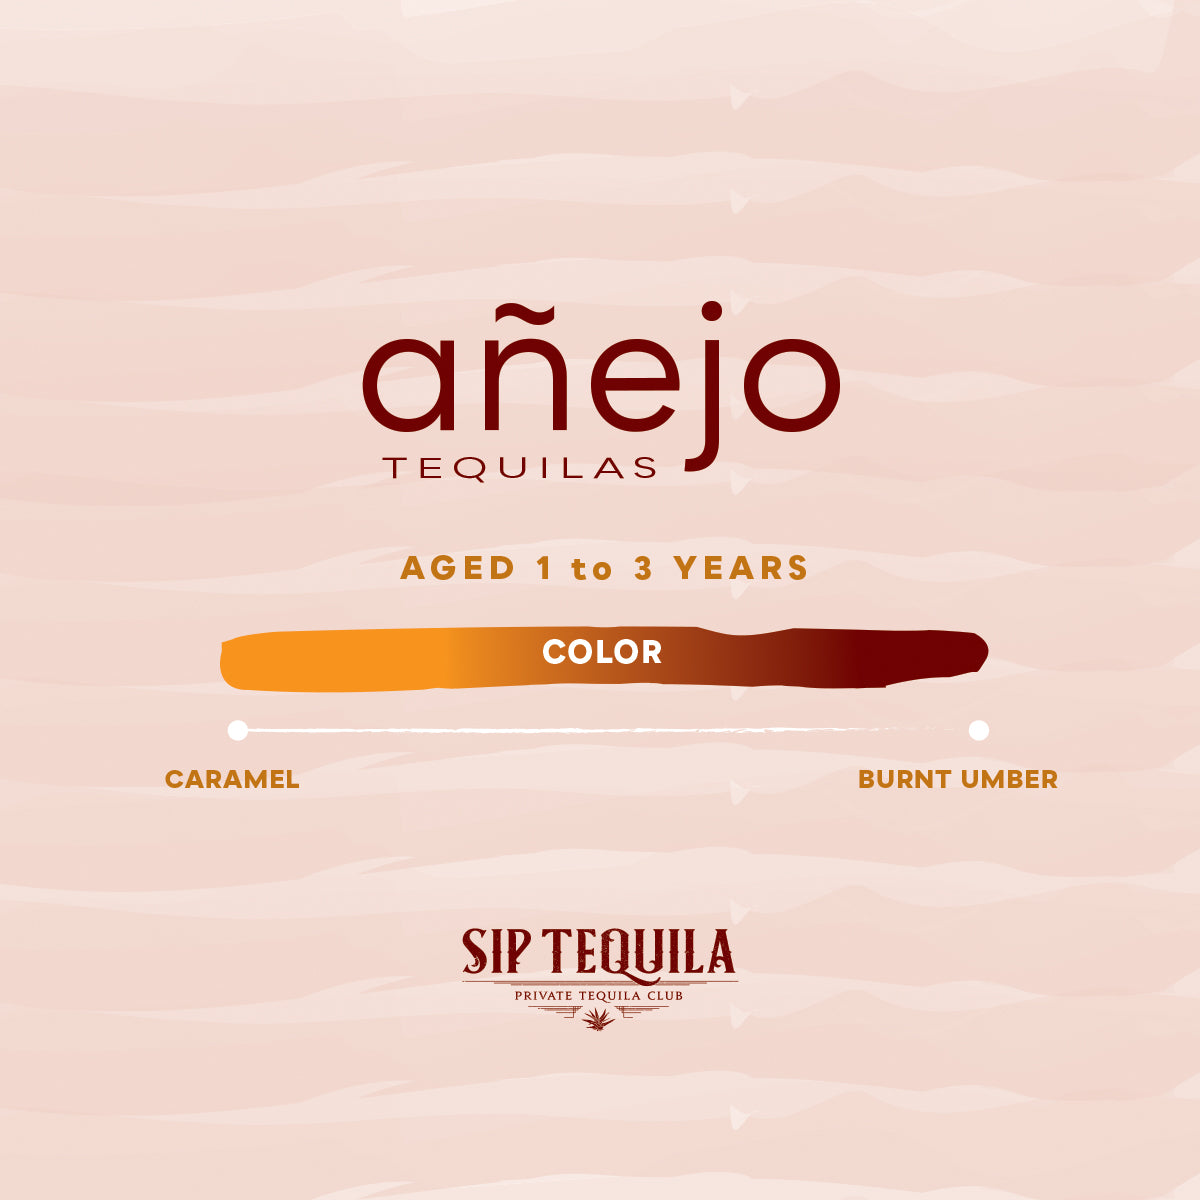 Anejo Tequilas